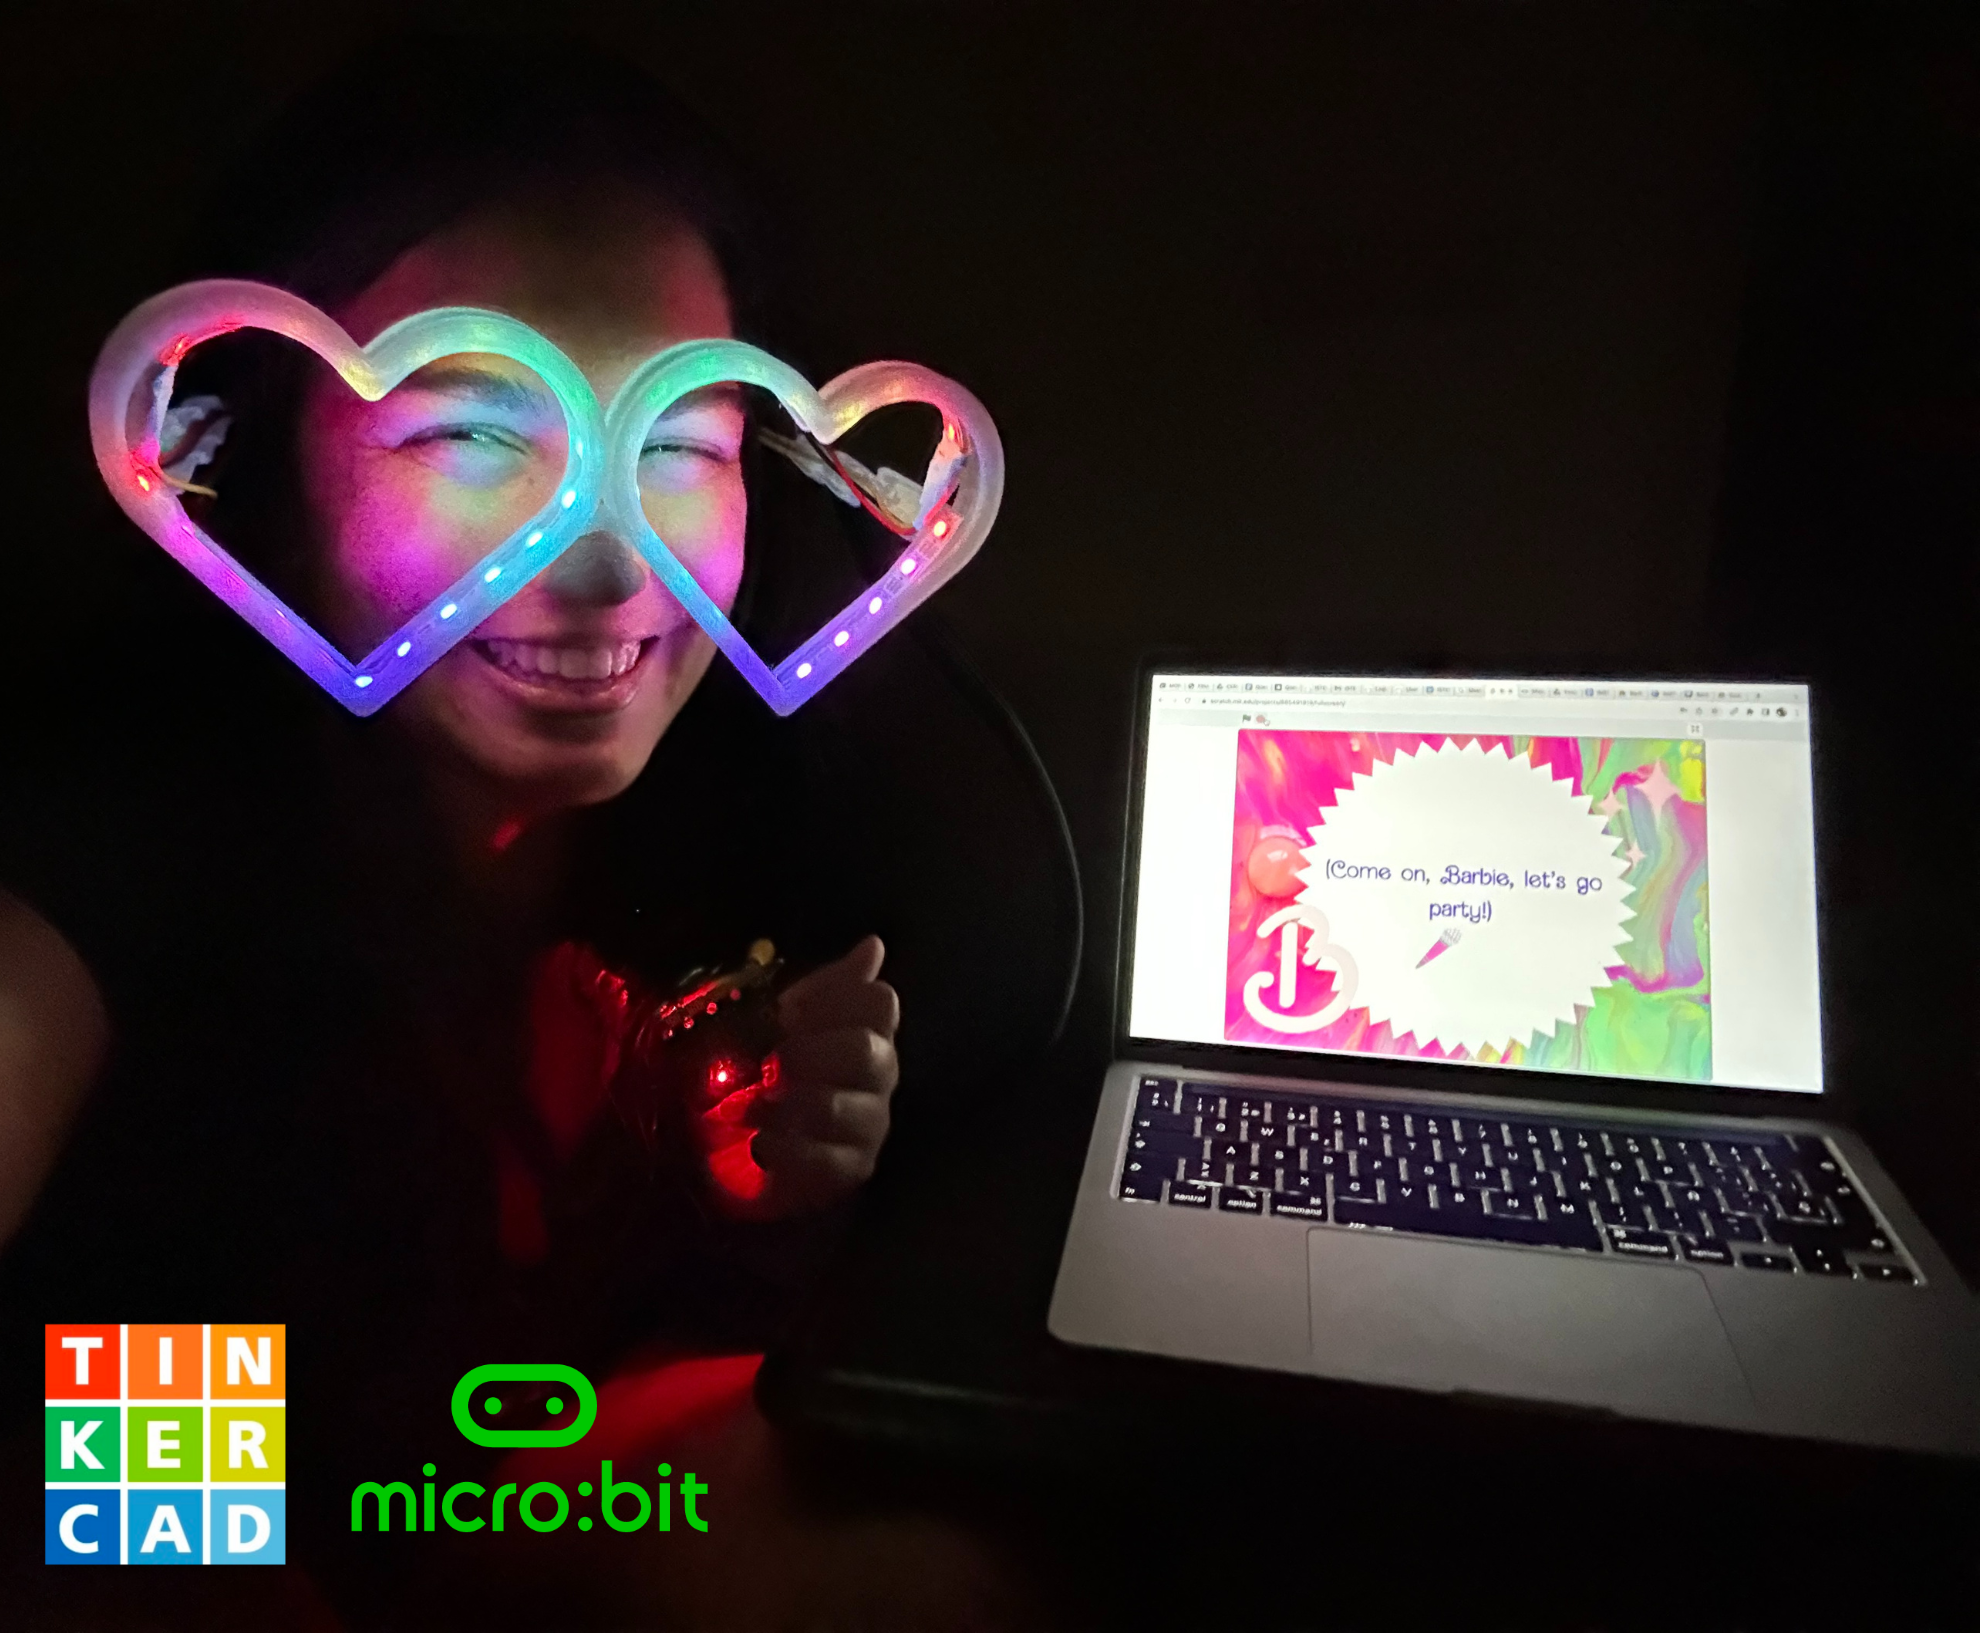 Barbie's Karaoke Voice-Activated Glasses With Voice-Responsive Light Effects: Tinkercad and Micro:bit Enchantment! 🎵✨